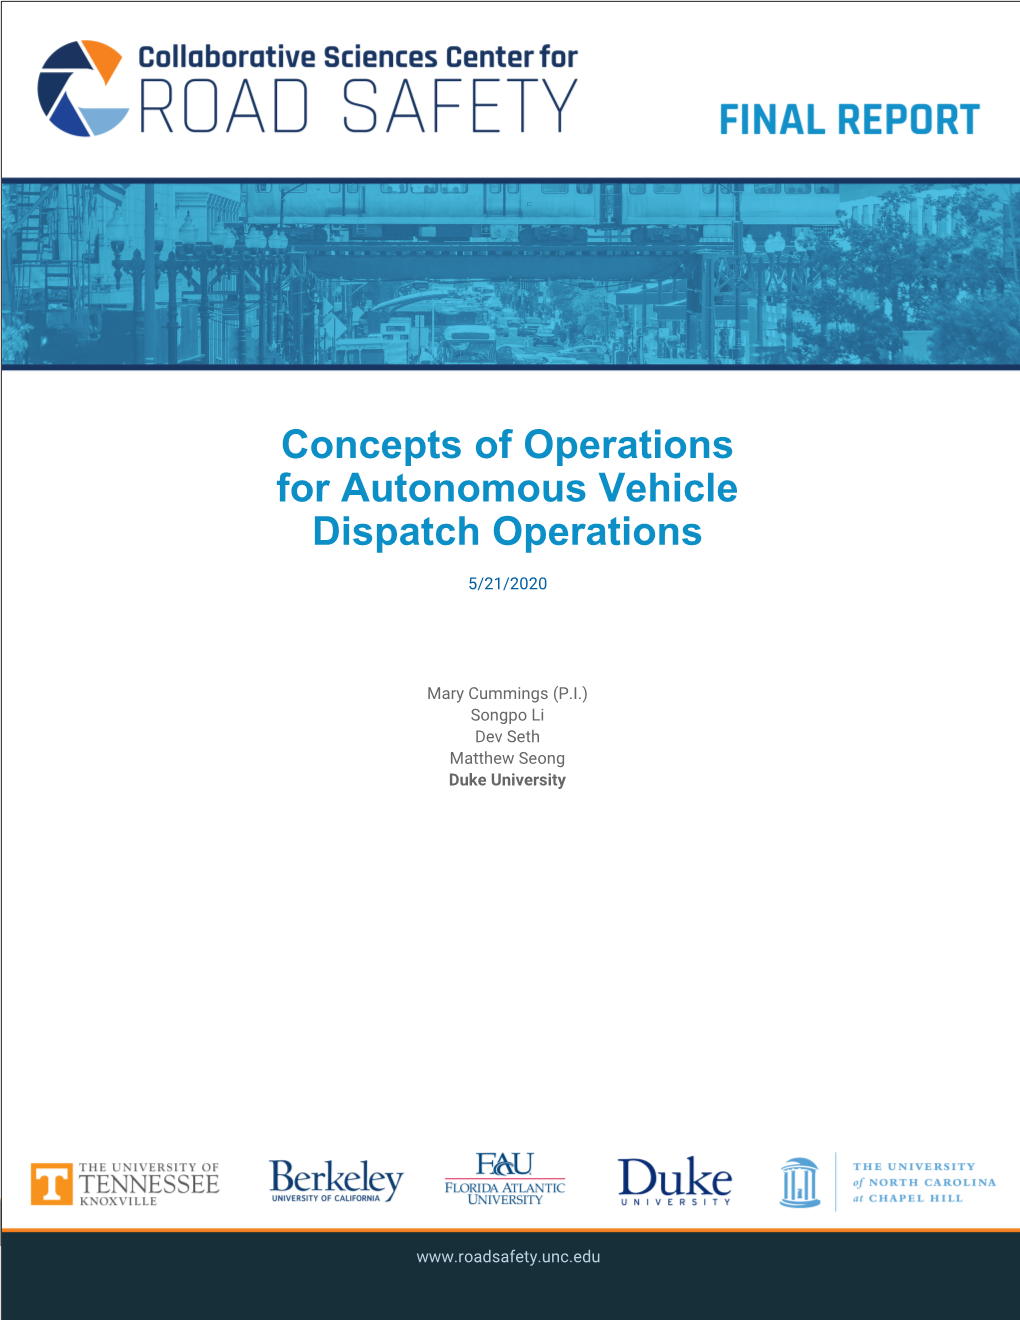 Concepts of Operations for Autonomous Vehicle Dispatch Operations